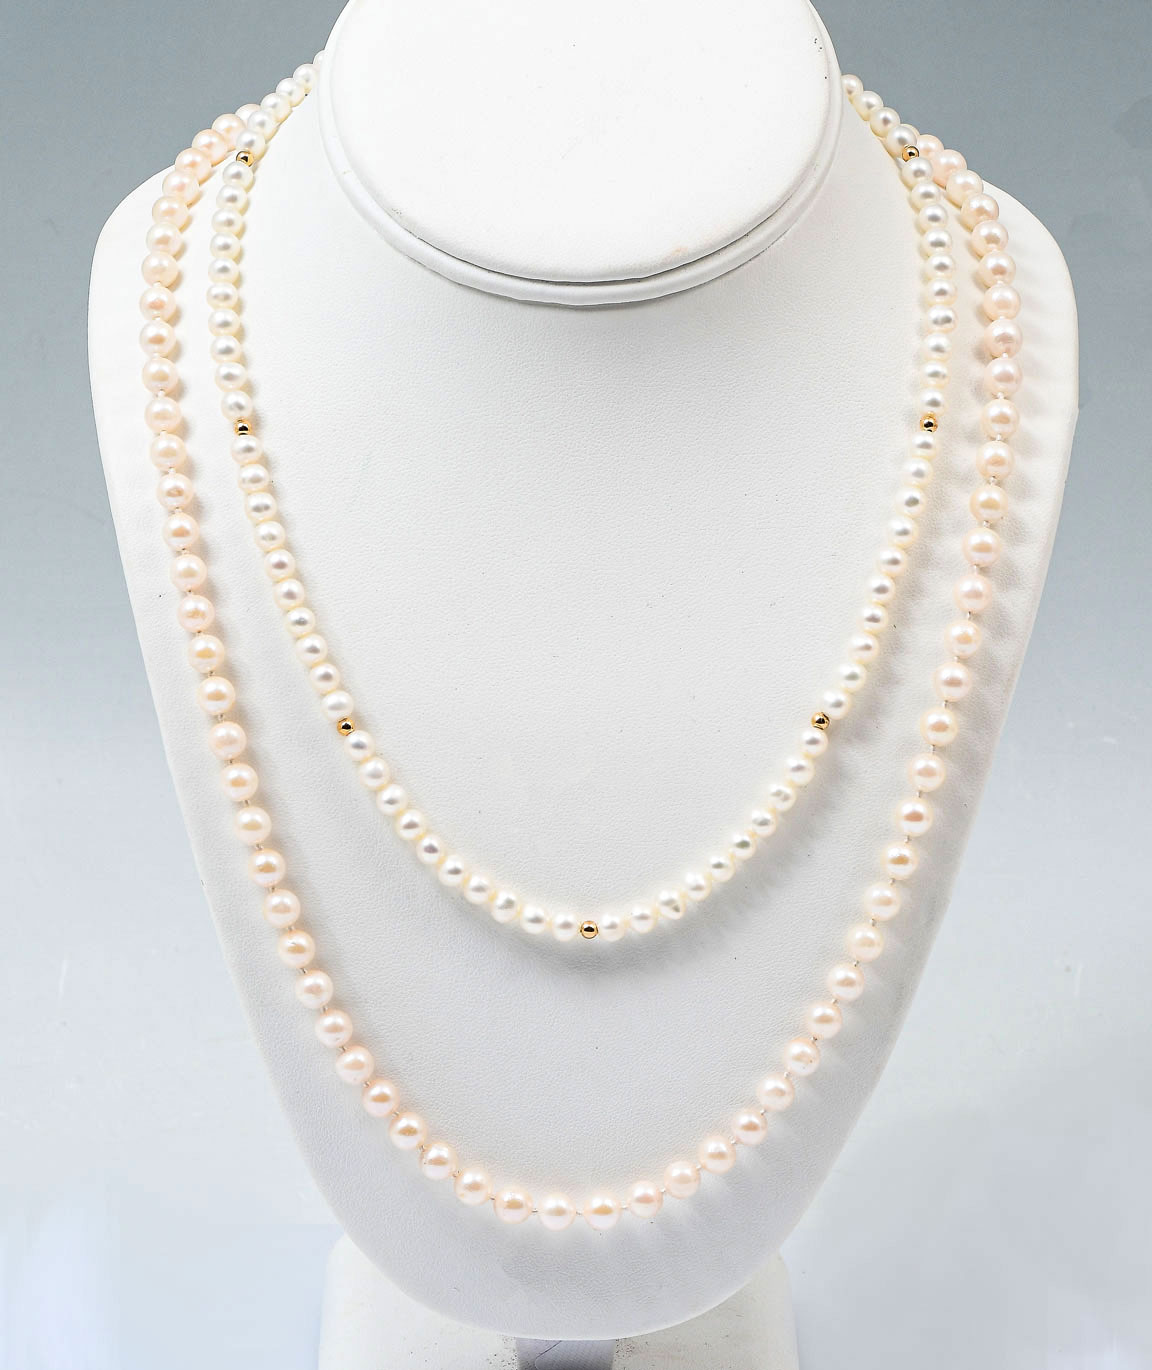 2 CULTURED PEARL NECKLACES WITH 36c352